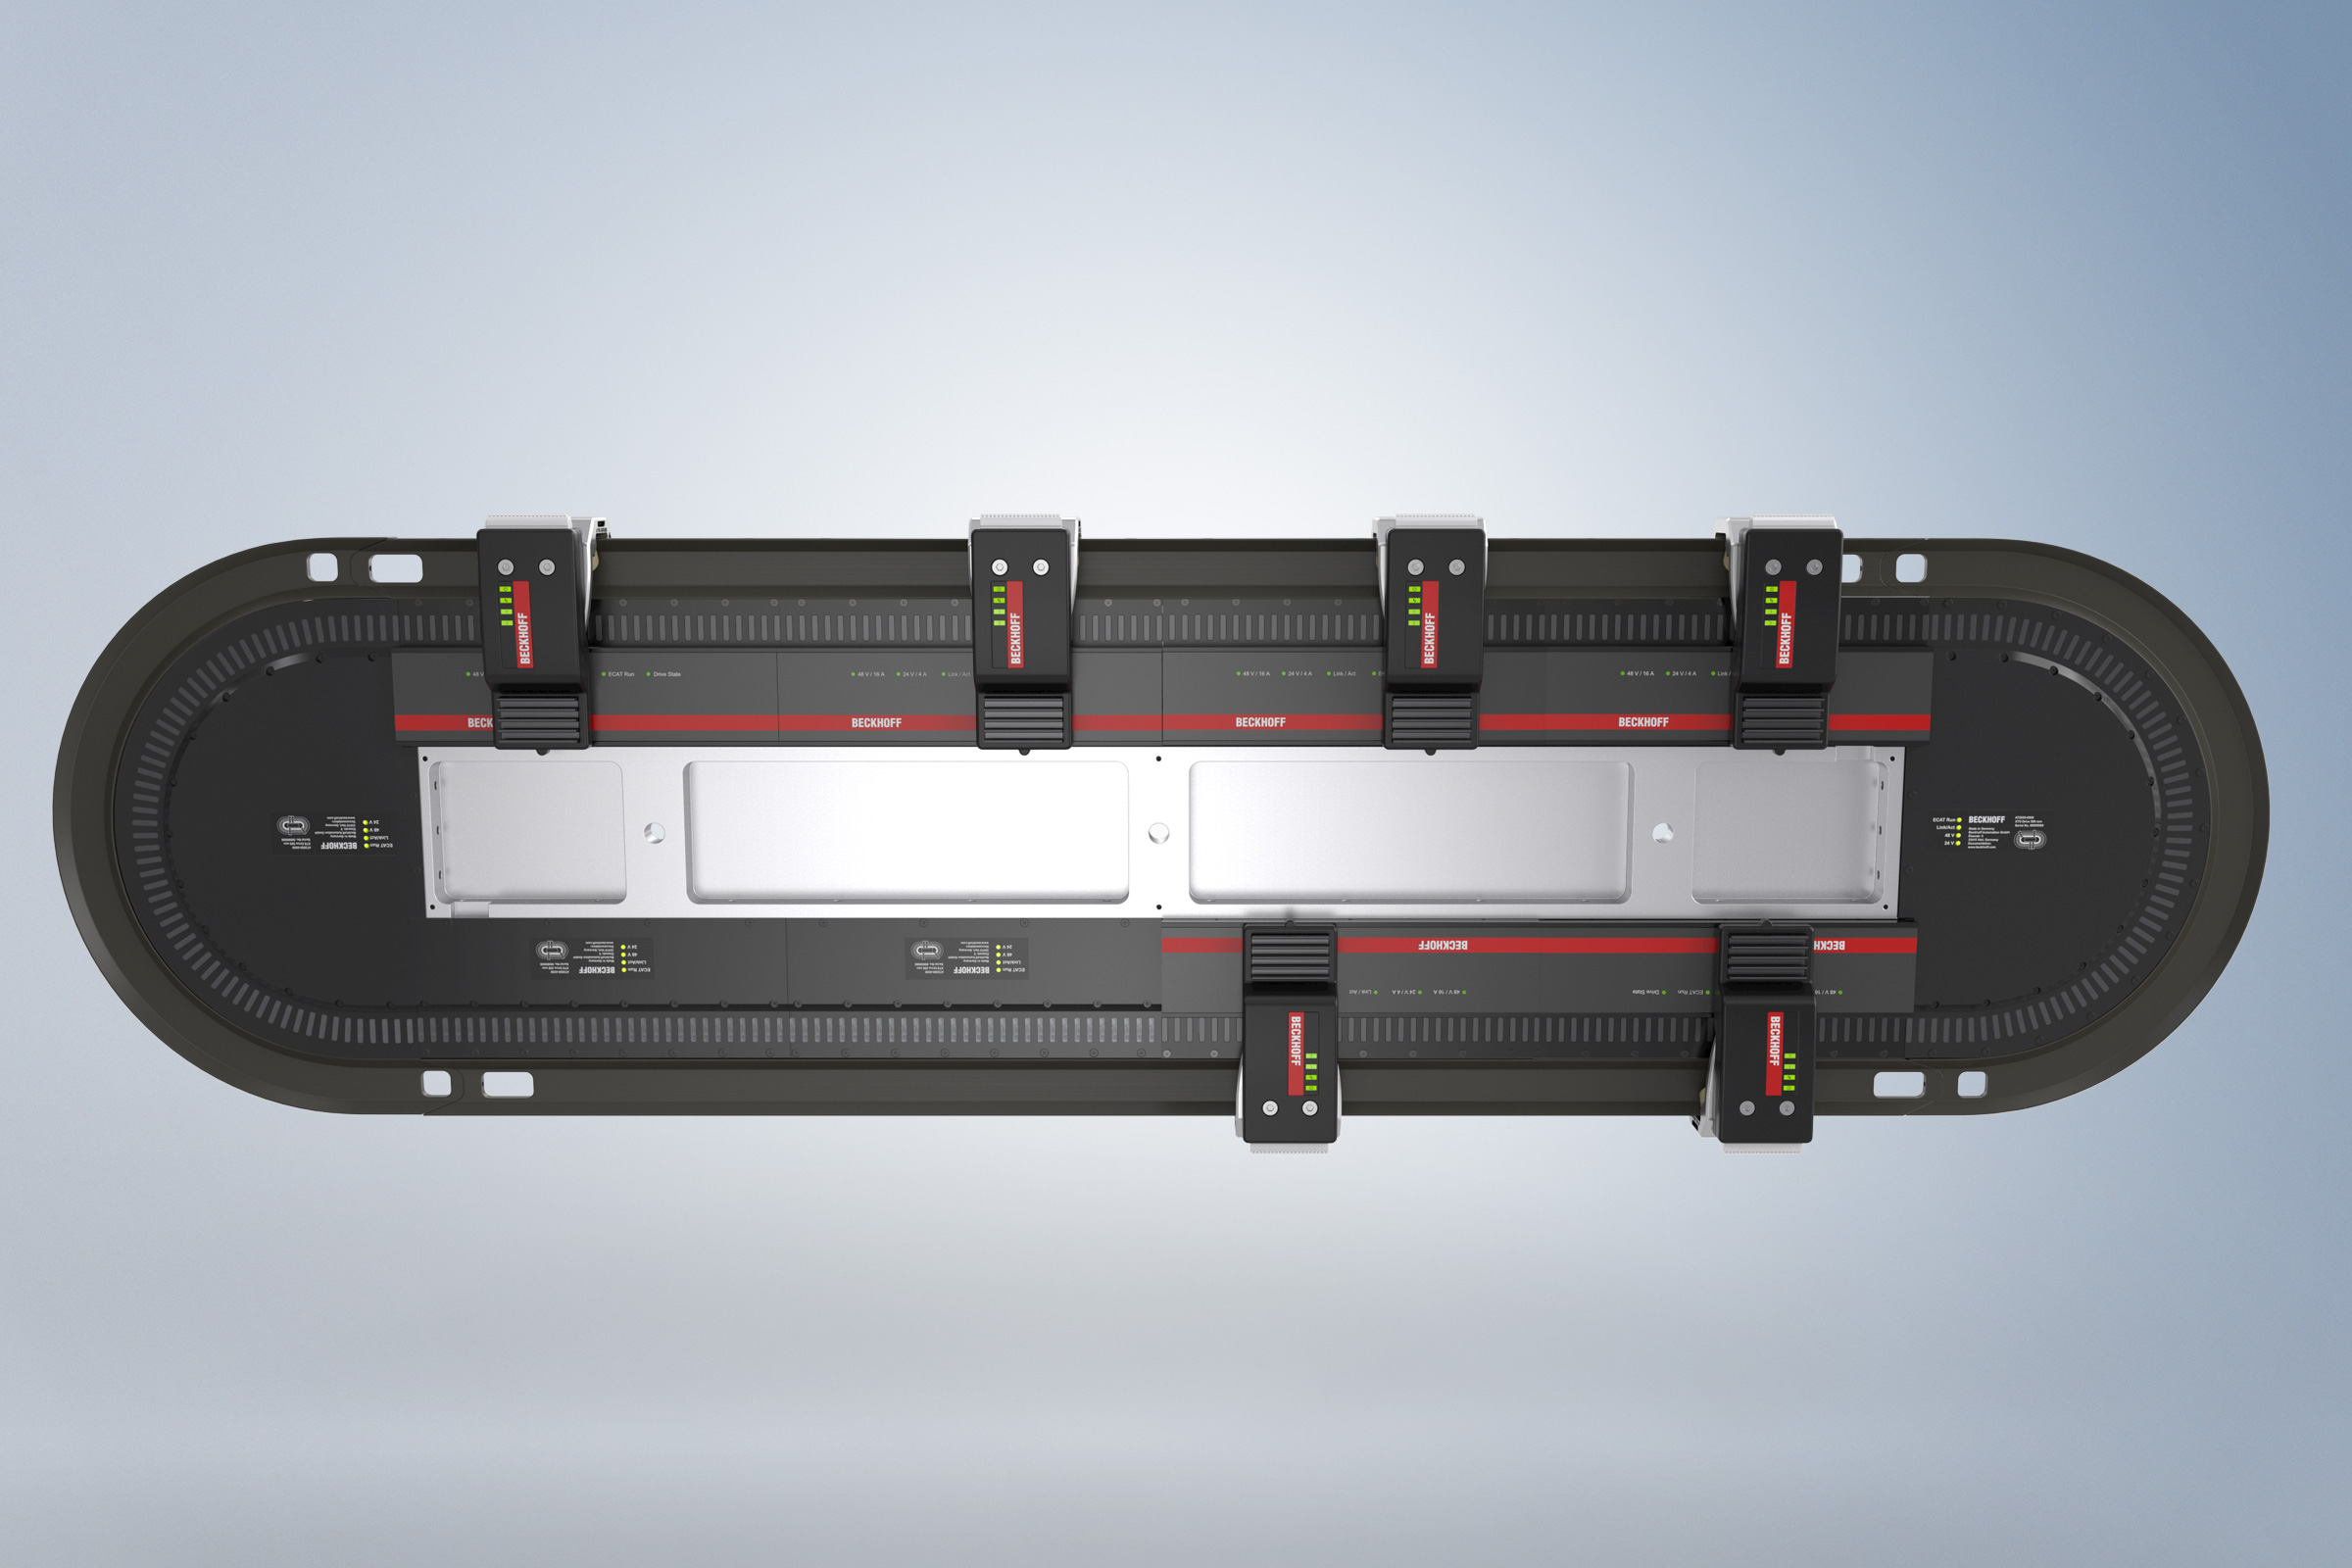 The overall XTS system with NCT is fully compatible with the existing XTS modular system.